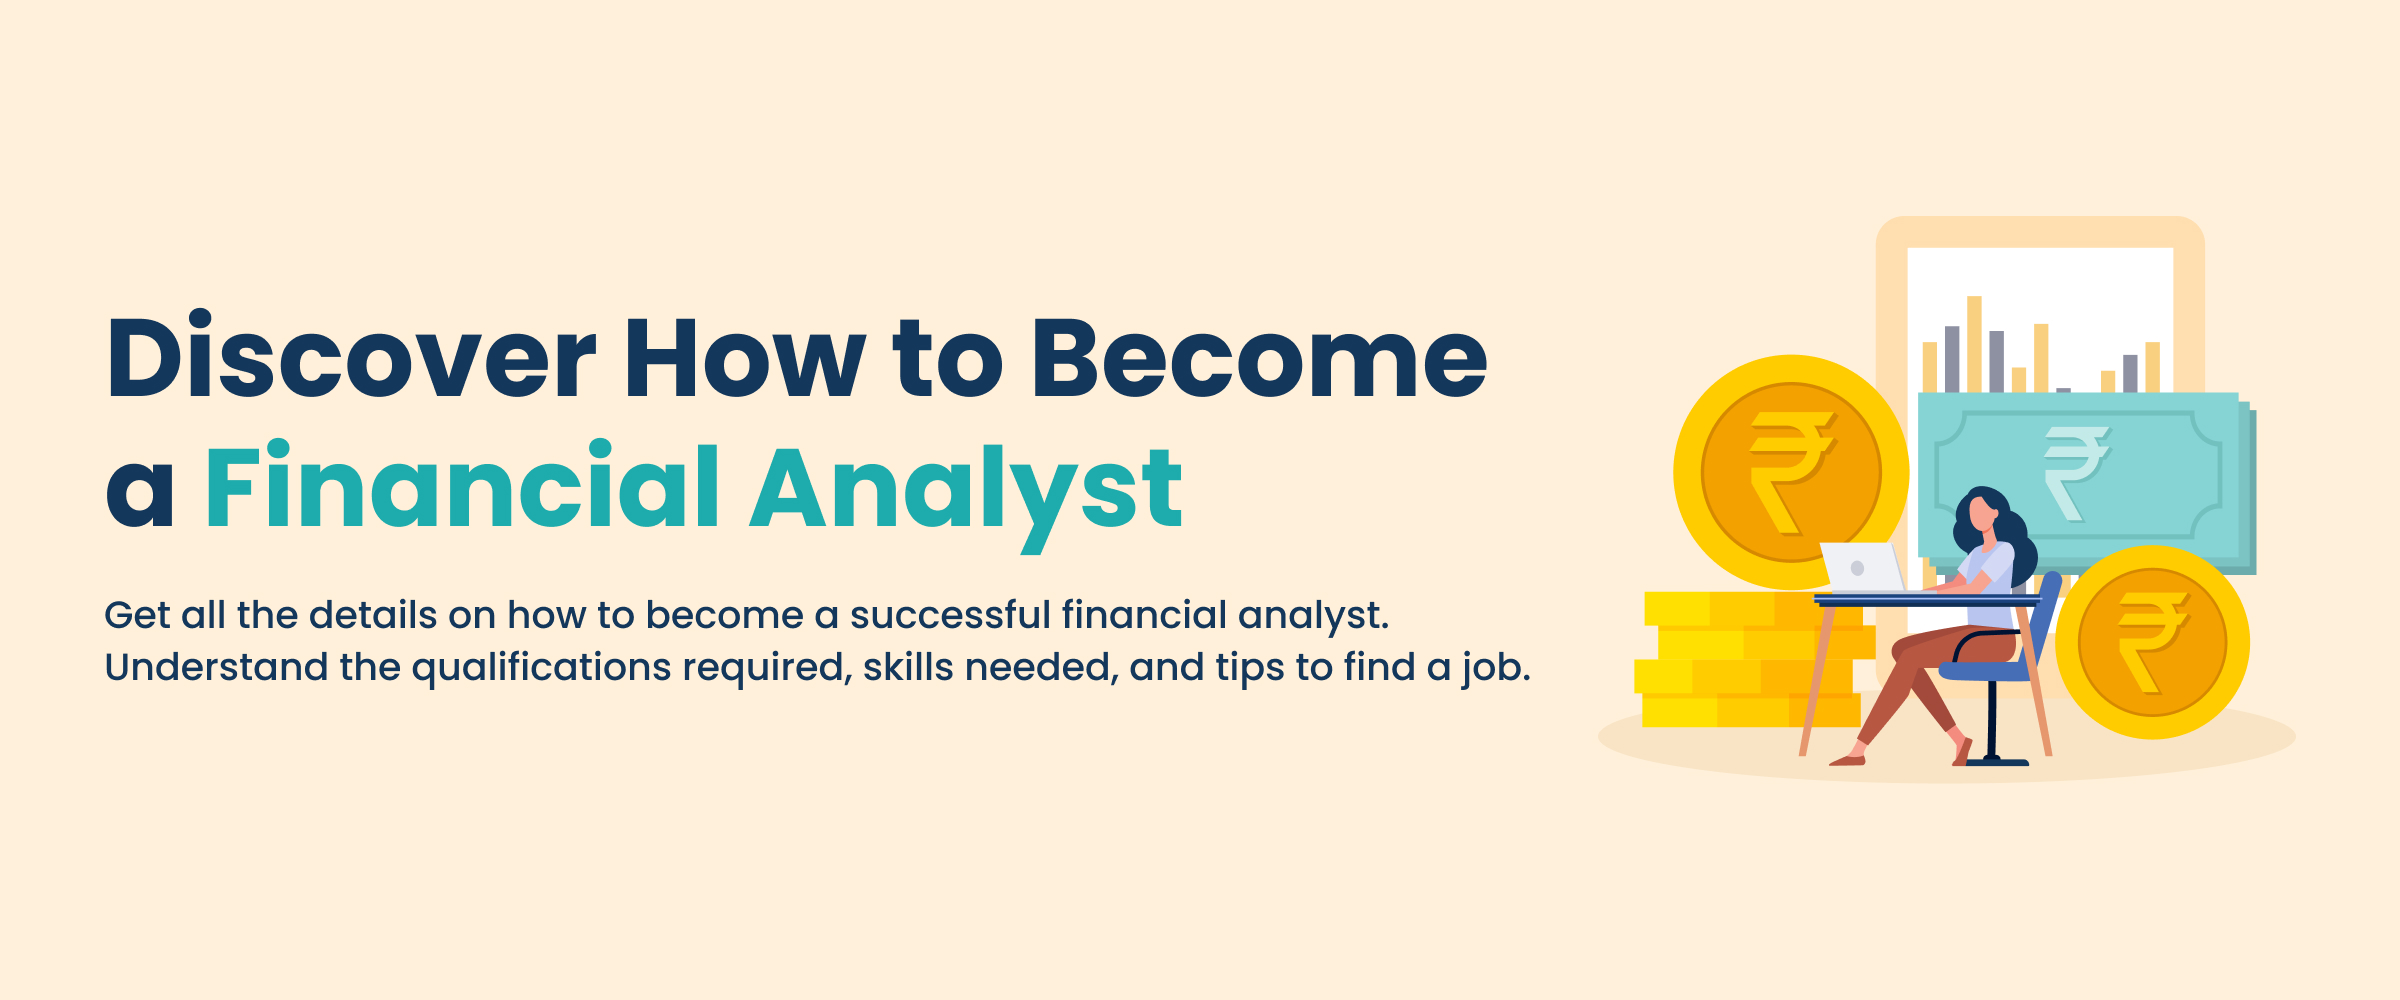 How to Become Financial Analyst